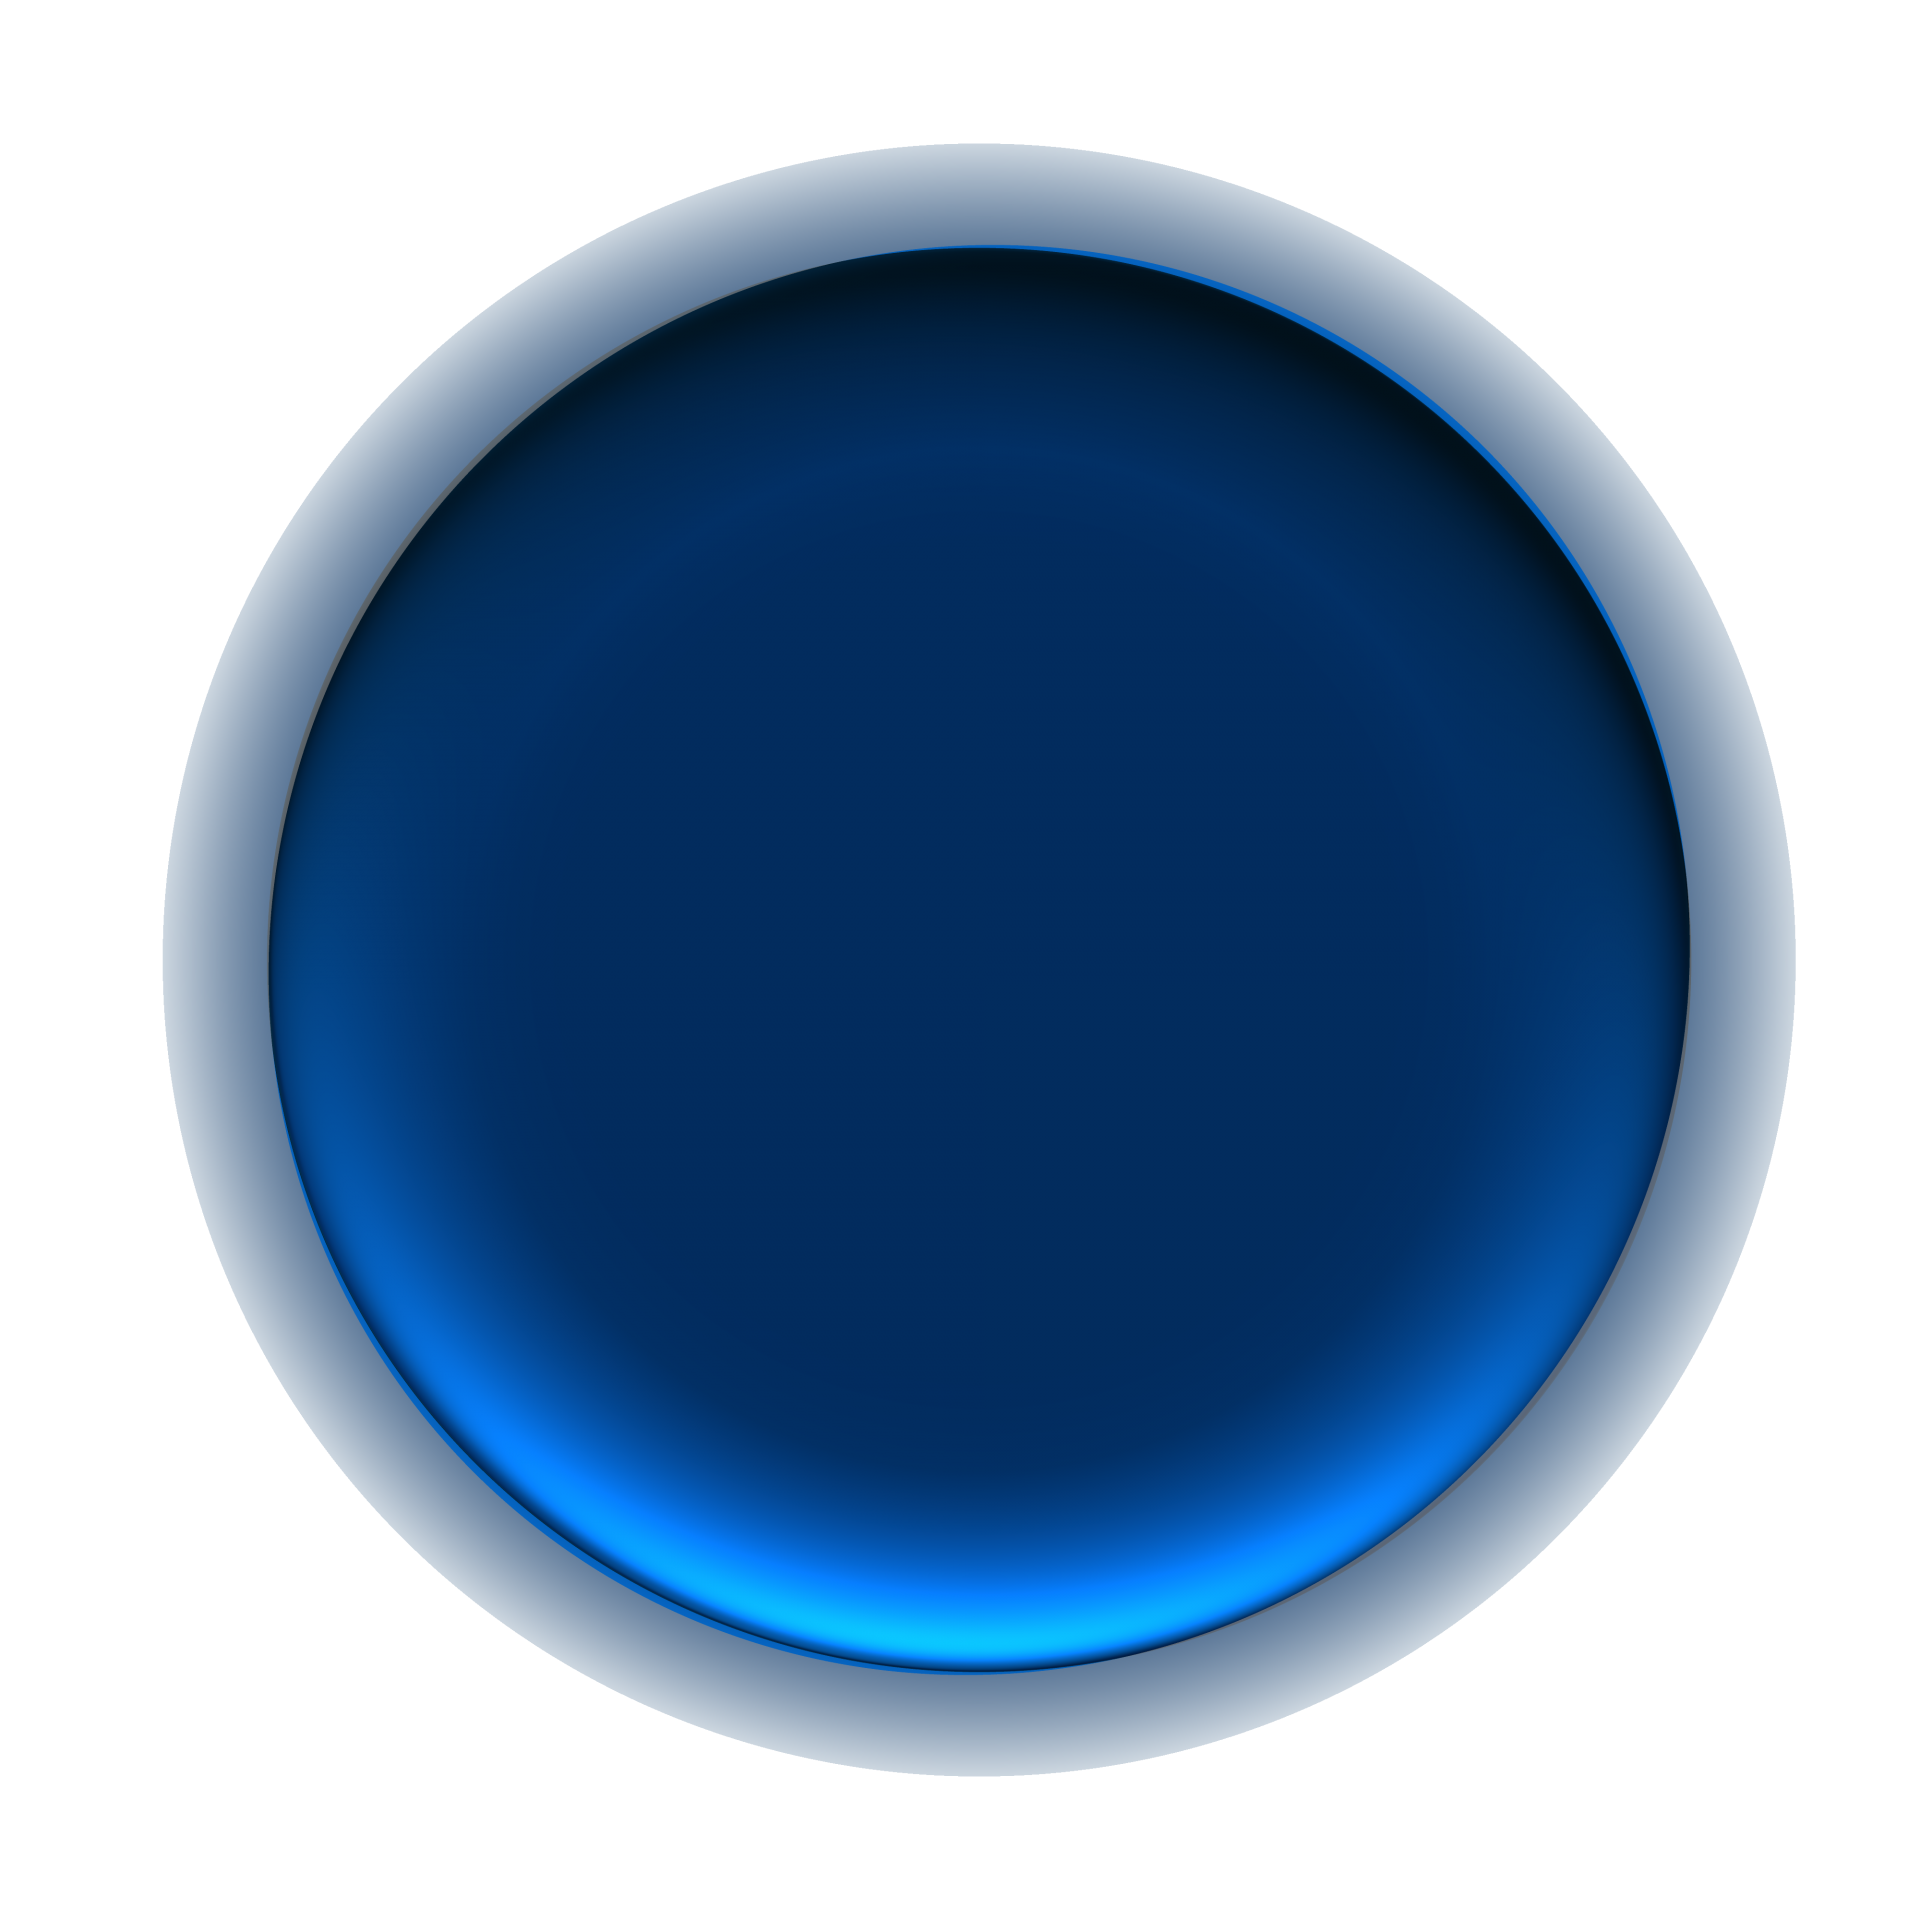 Blue Button PNG HD Image